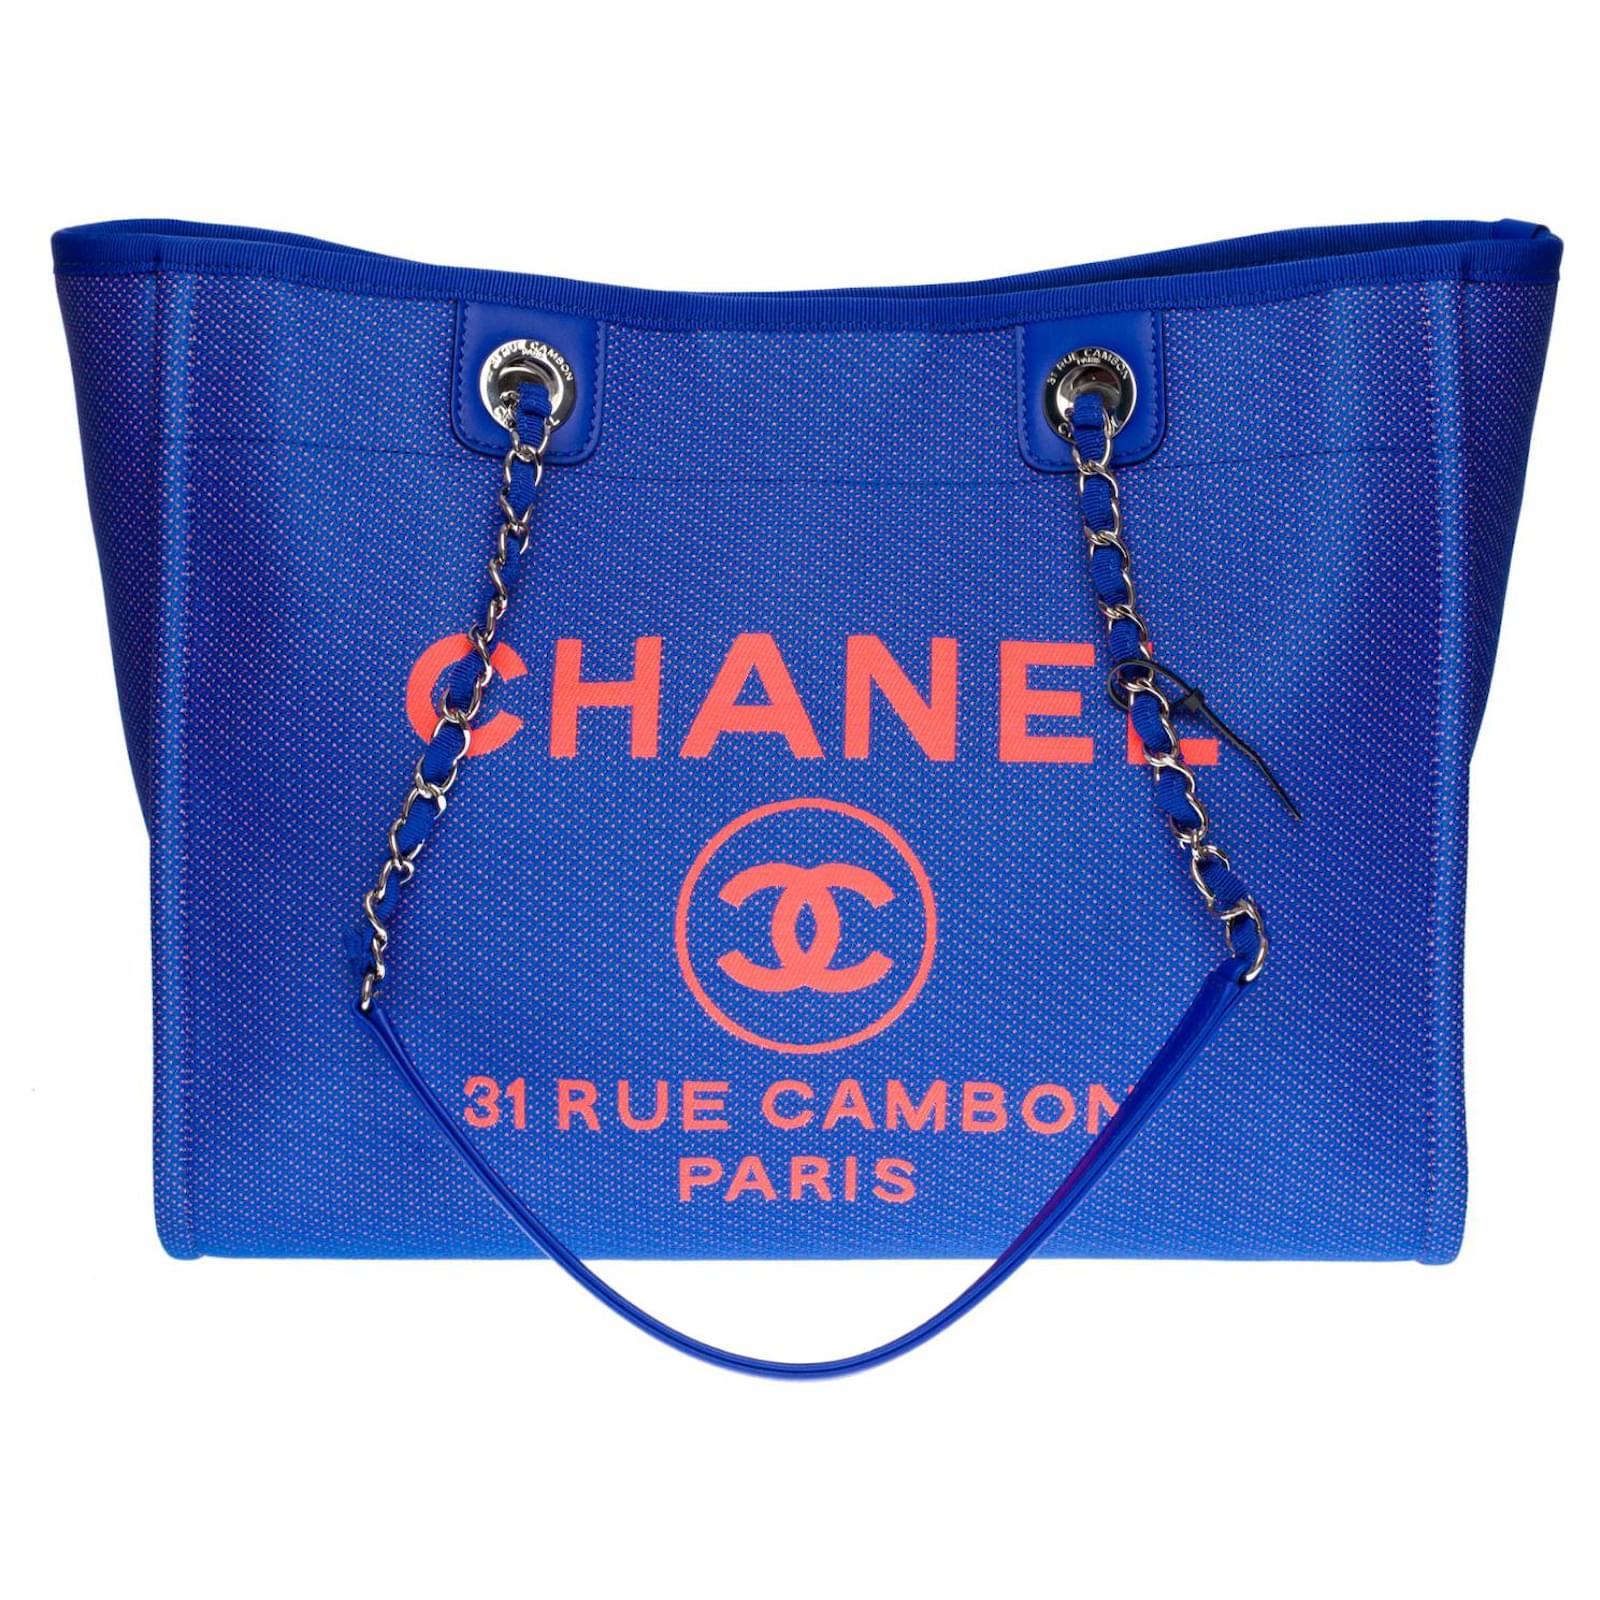 Superb Chanel Deauville tote bag in electric blue and Fluo orange